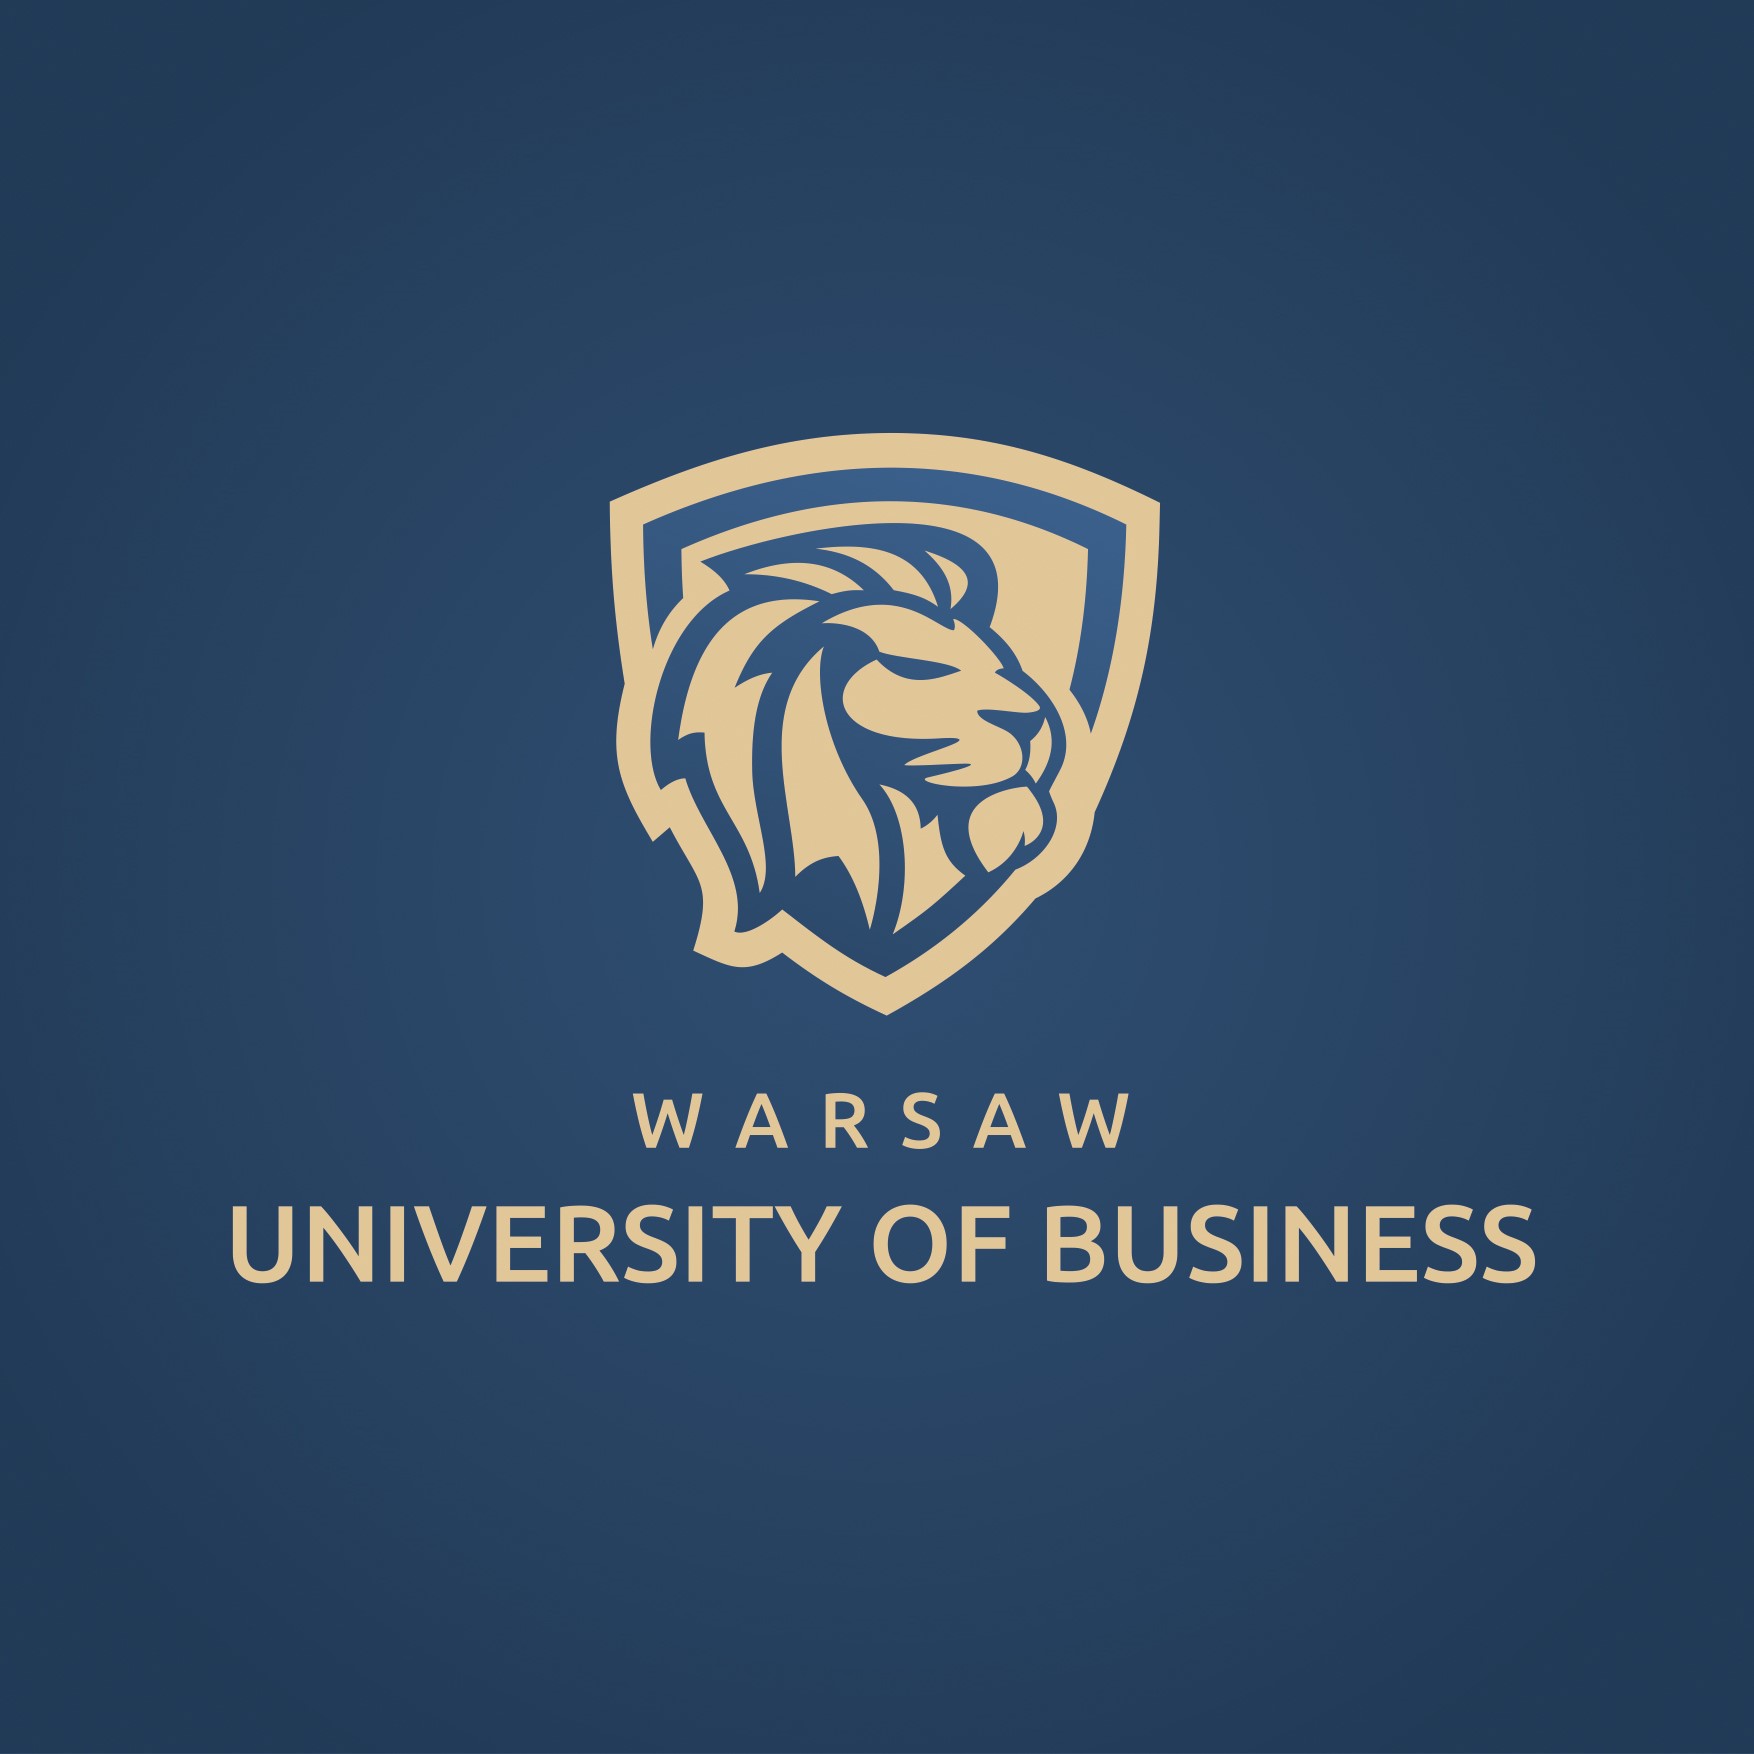 Study in Poland: logistics, management, national security, MBA